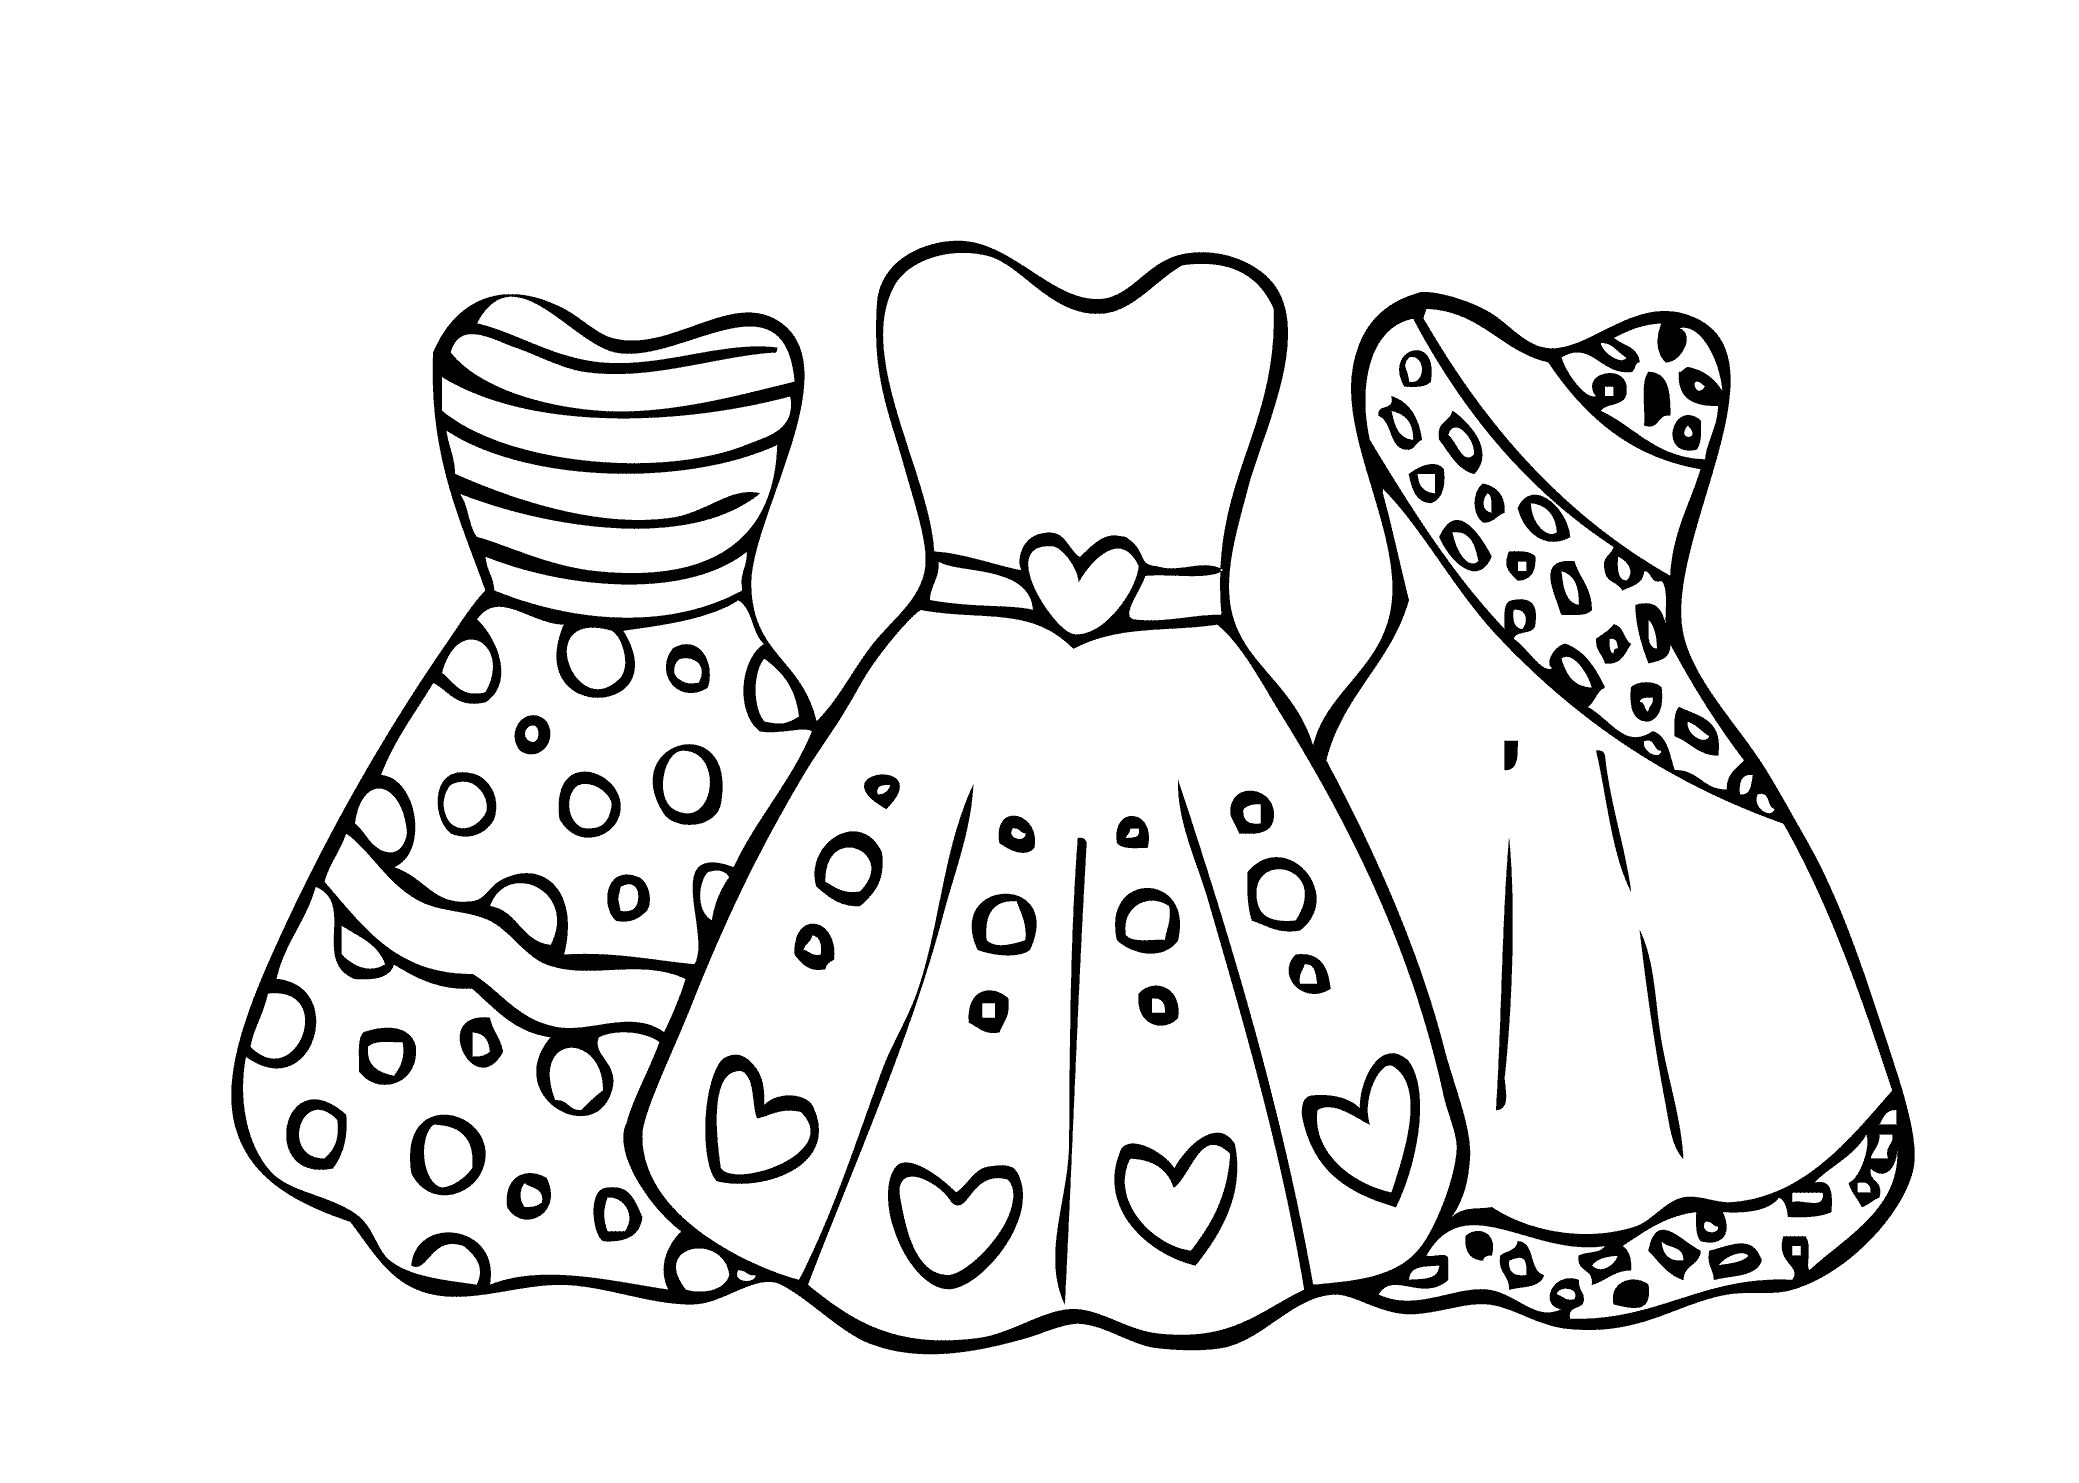 Coloring Pages That You Can Print at GetColorings.com | Free printable ...